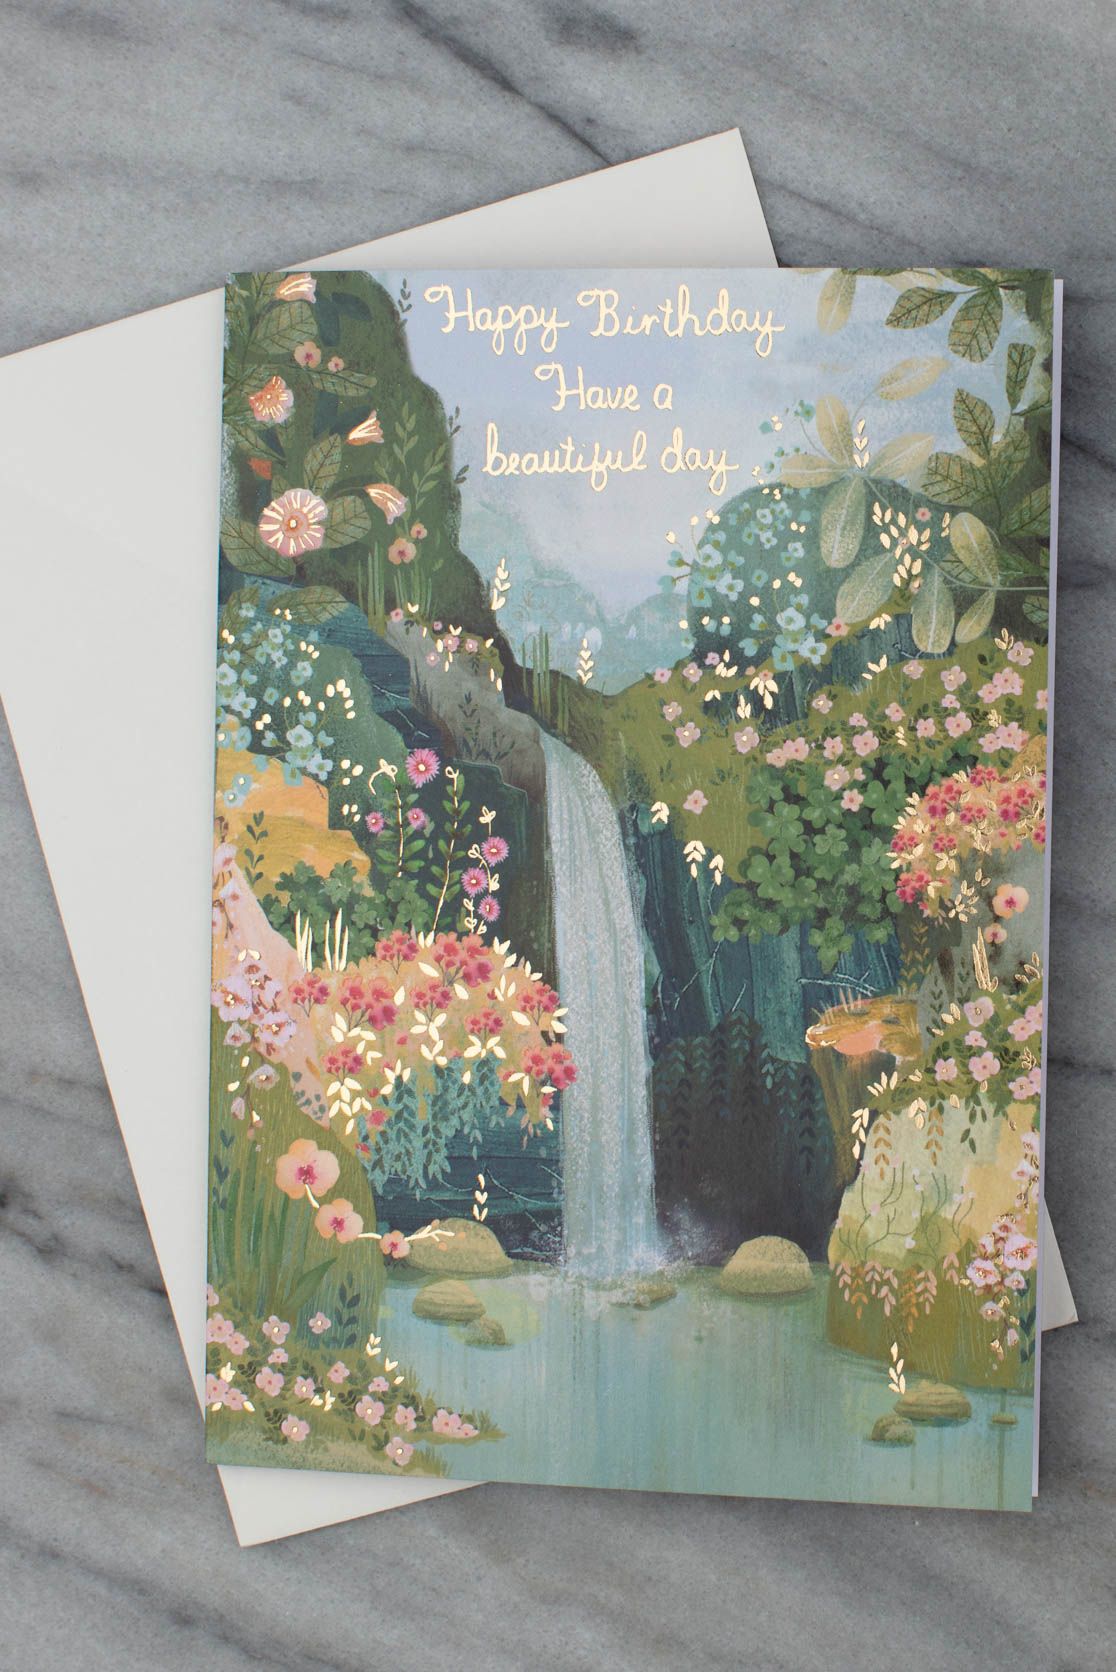 Waterfall and flowers birthday card with a white envelope